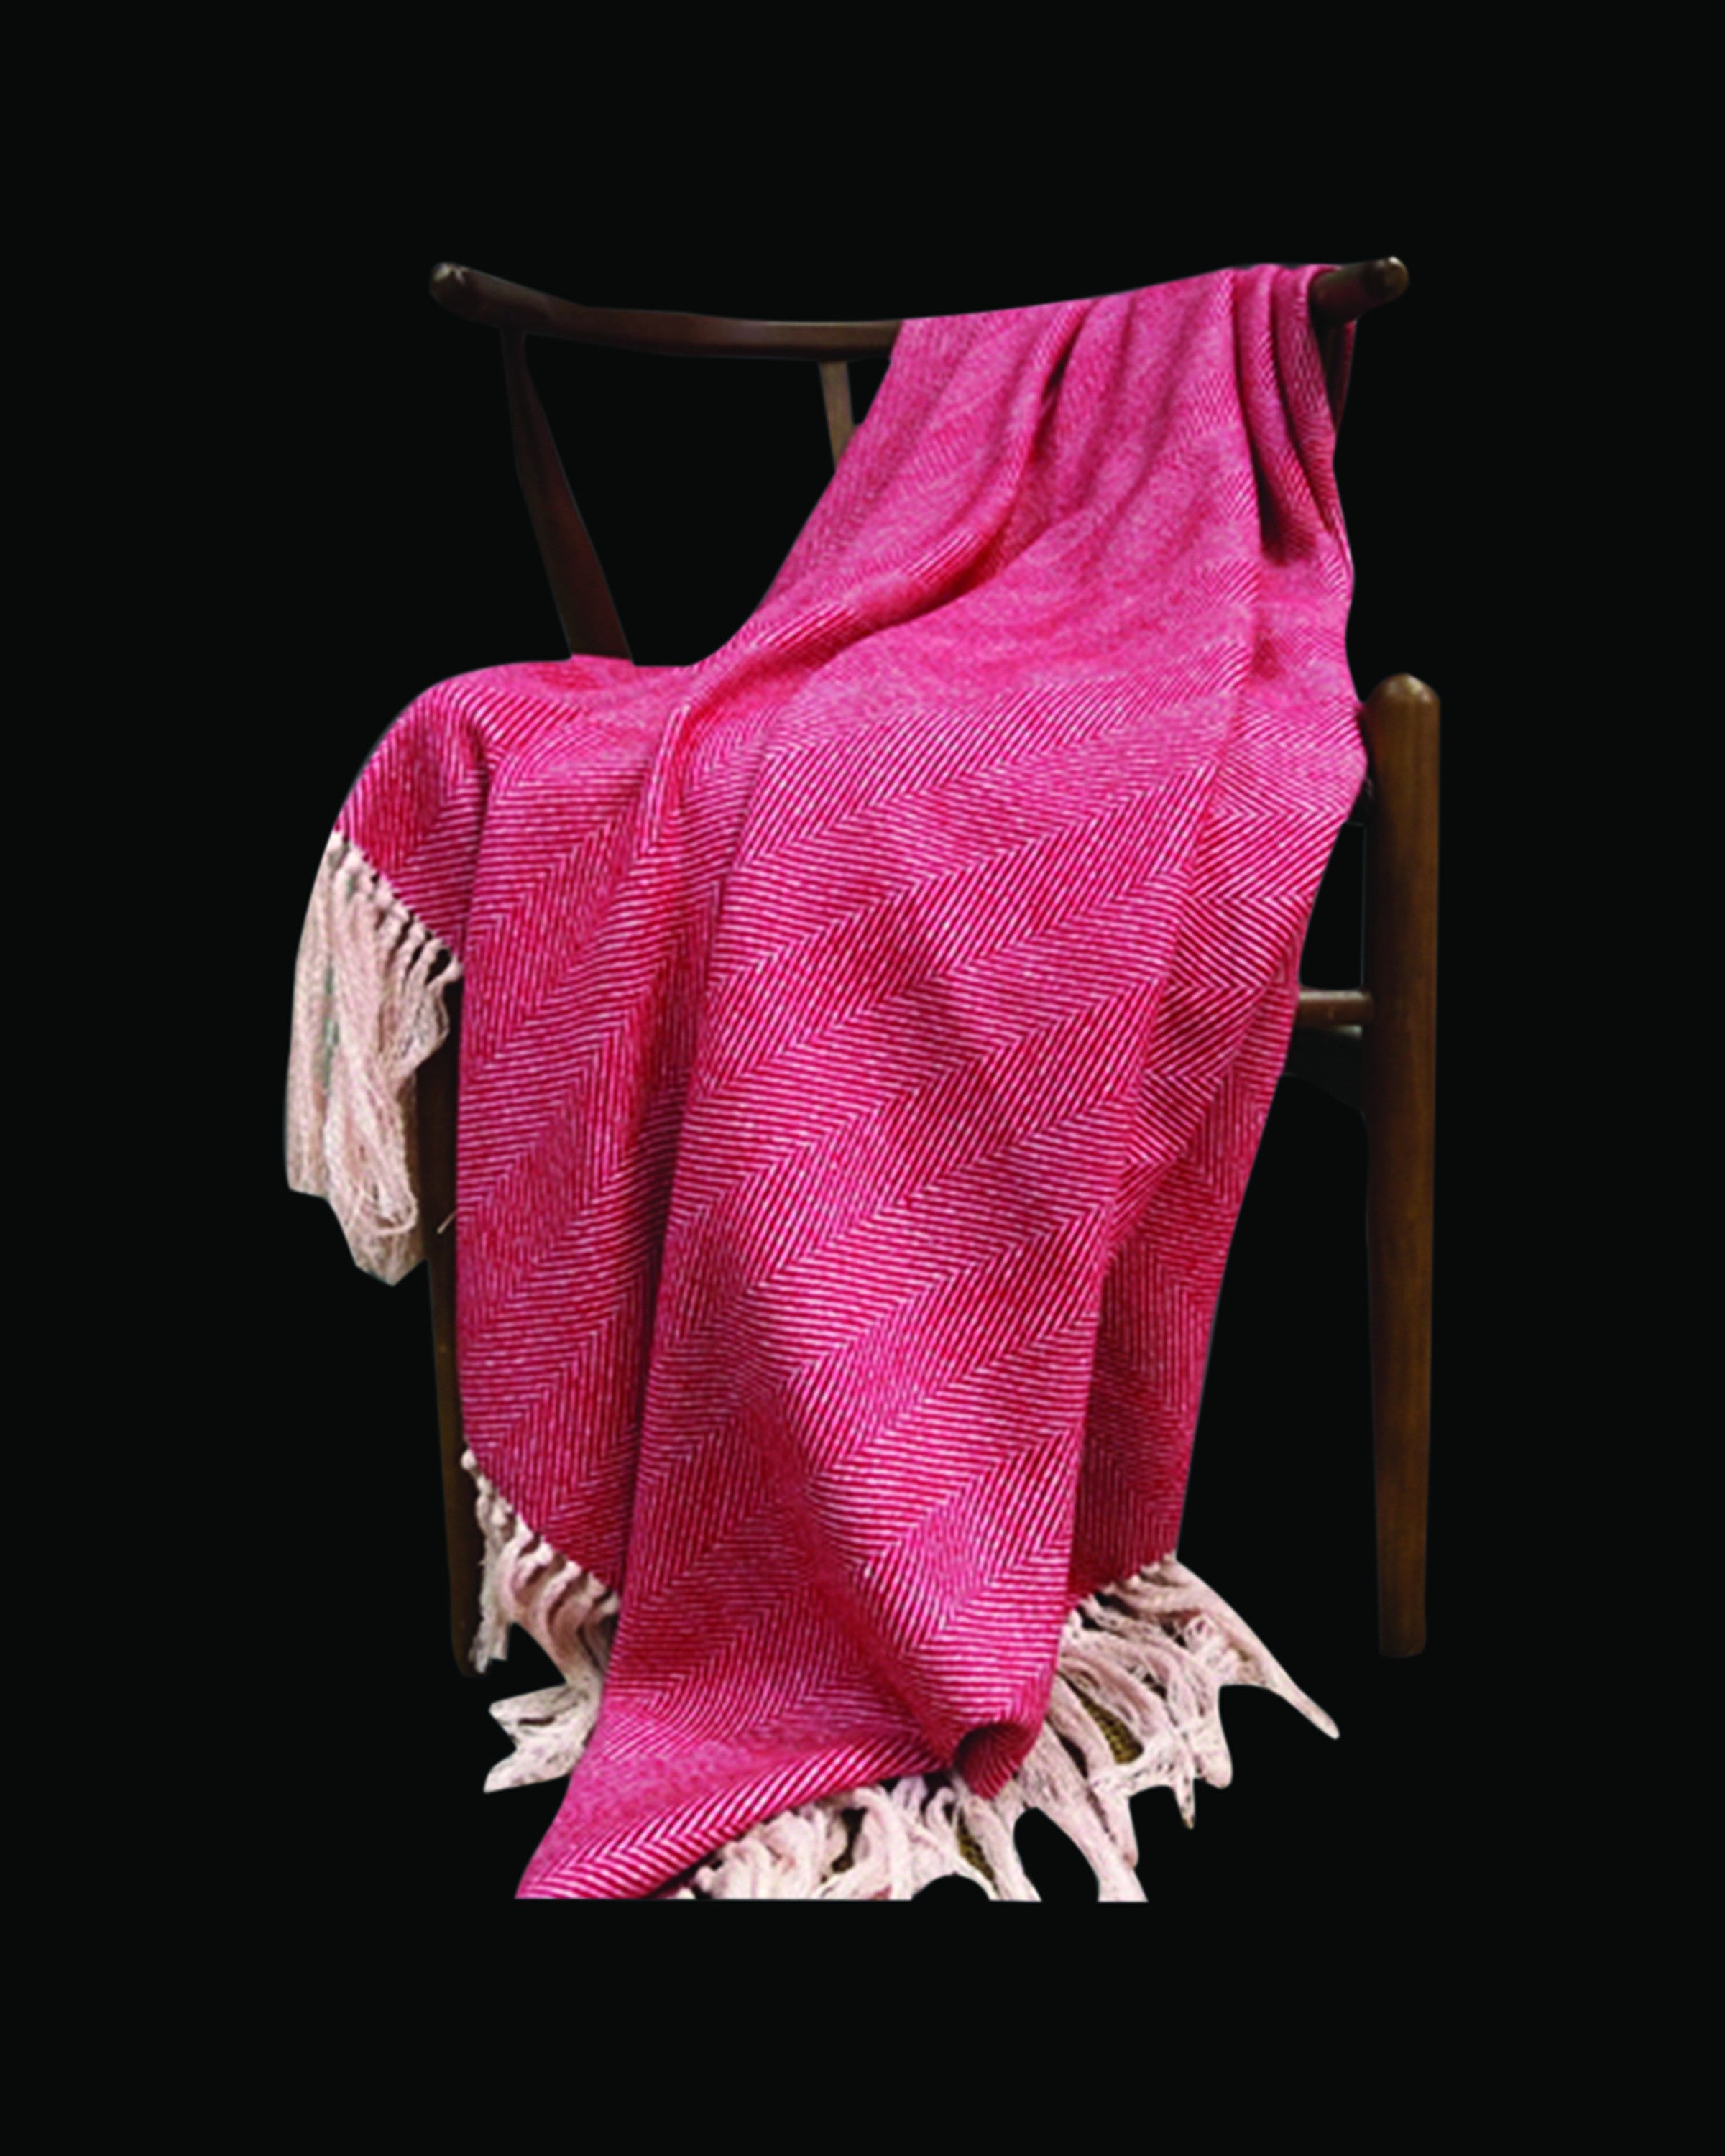 Luxury Pink throws & blankets